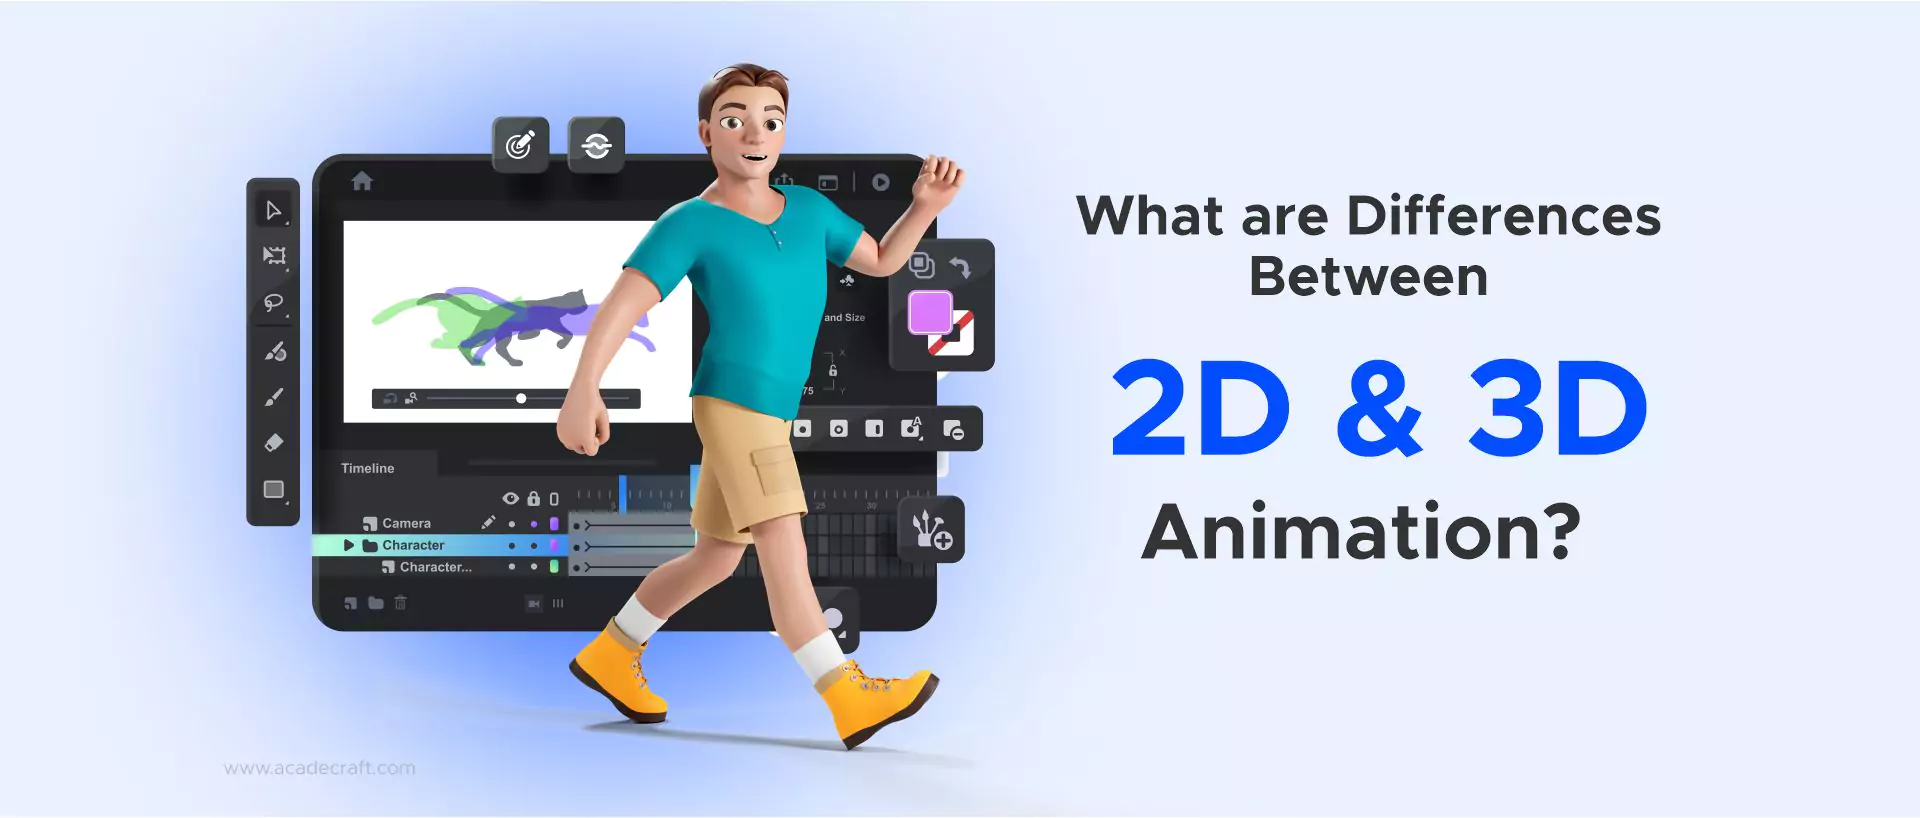 Understanding the Differences Between 2D & 3D Animation